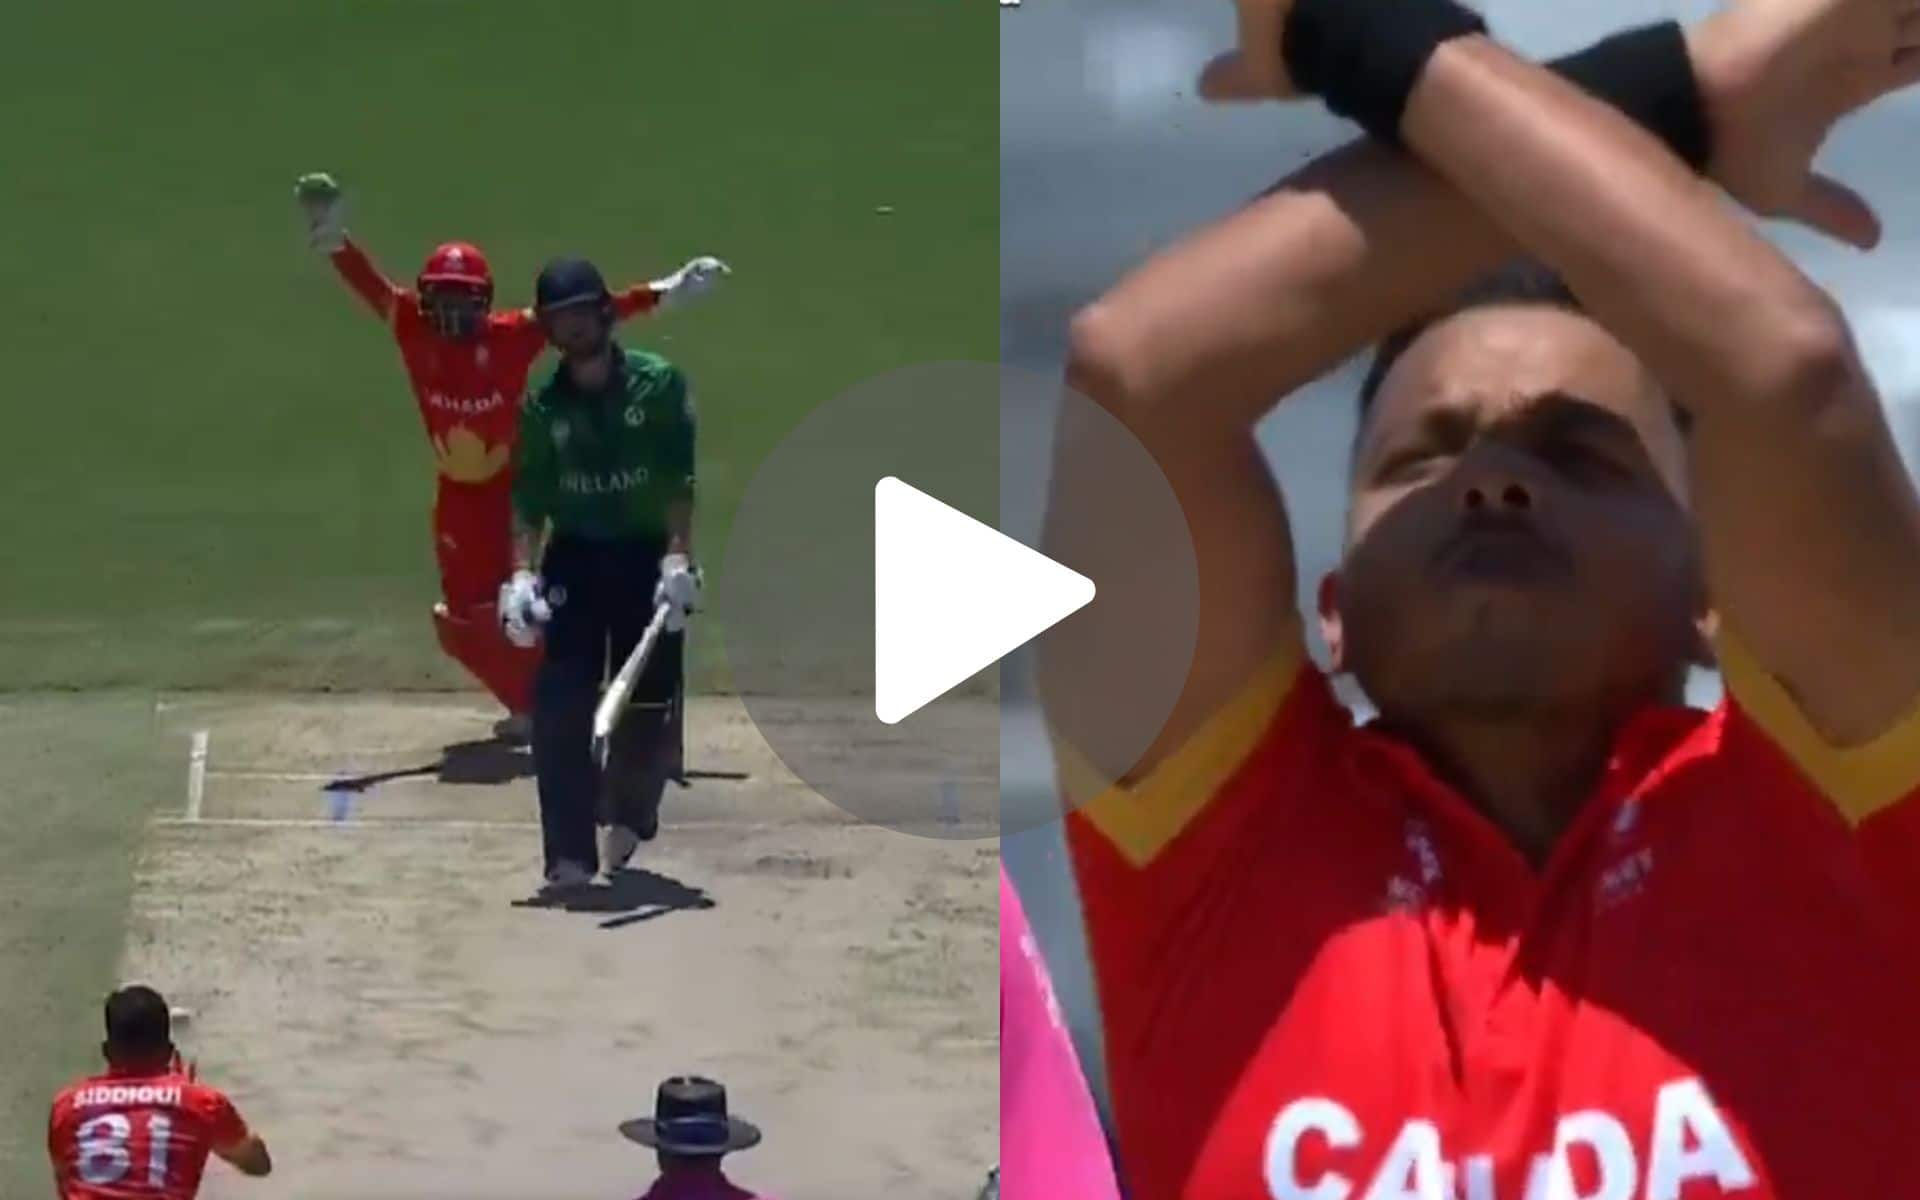 [Watch] You Don't Wanna Miss How Canadian Spinner Pulled Off Ronaldo-Like Celebration Vs Ireland